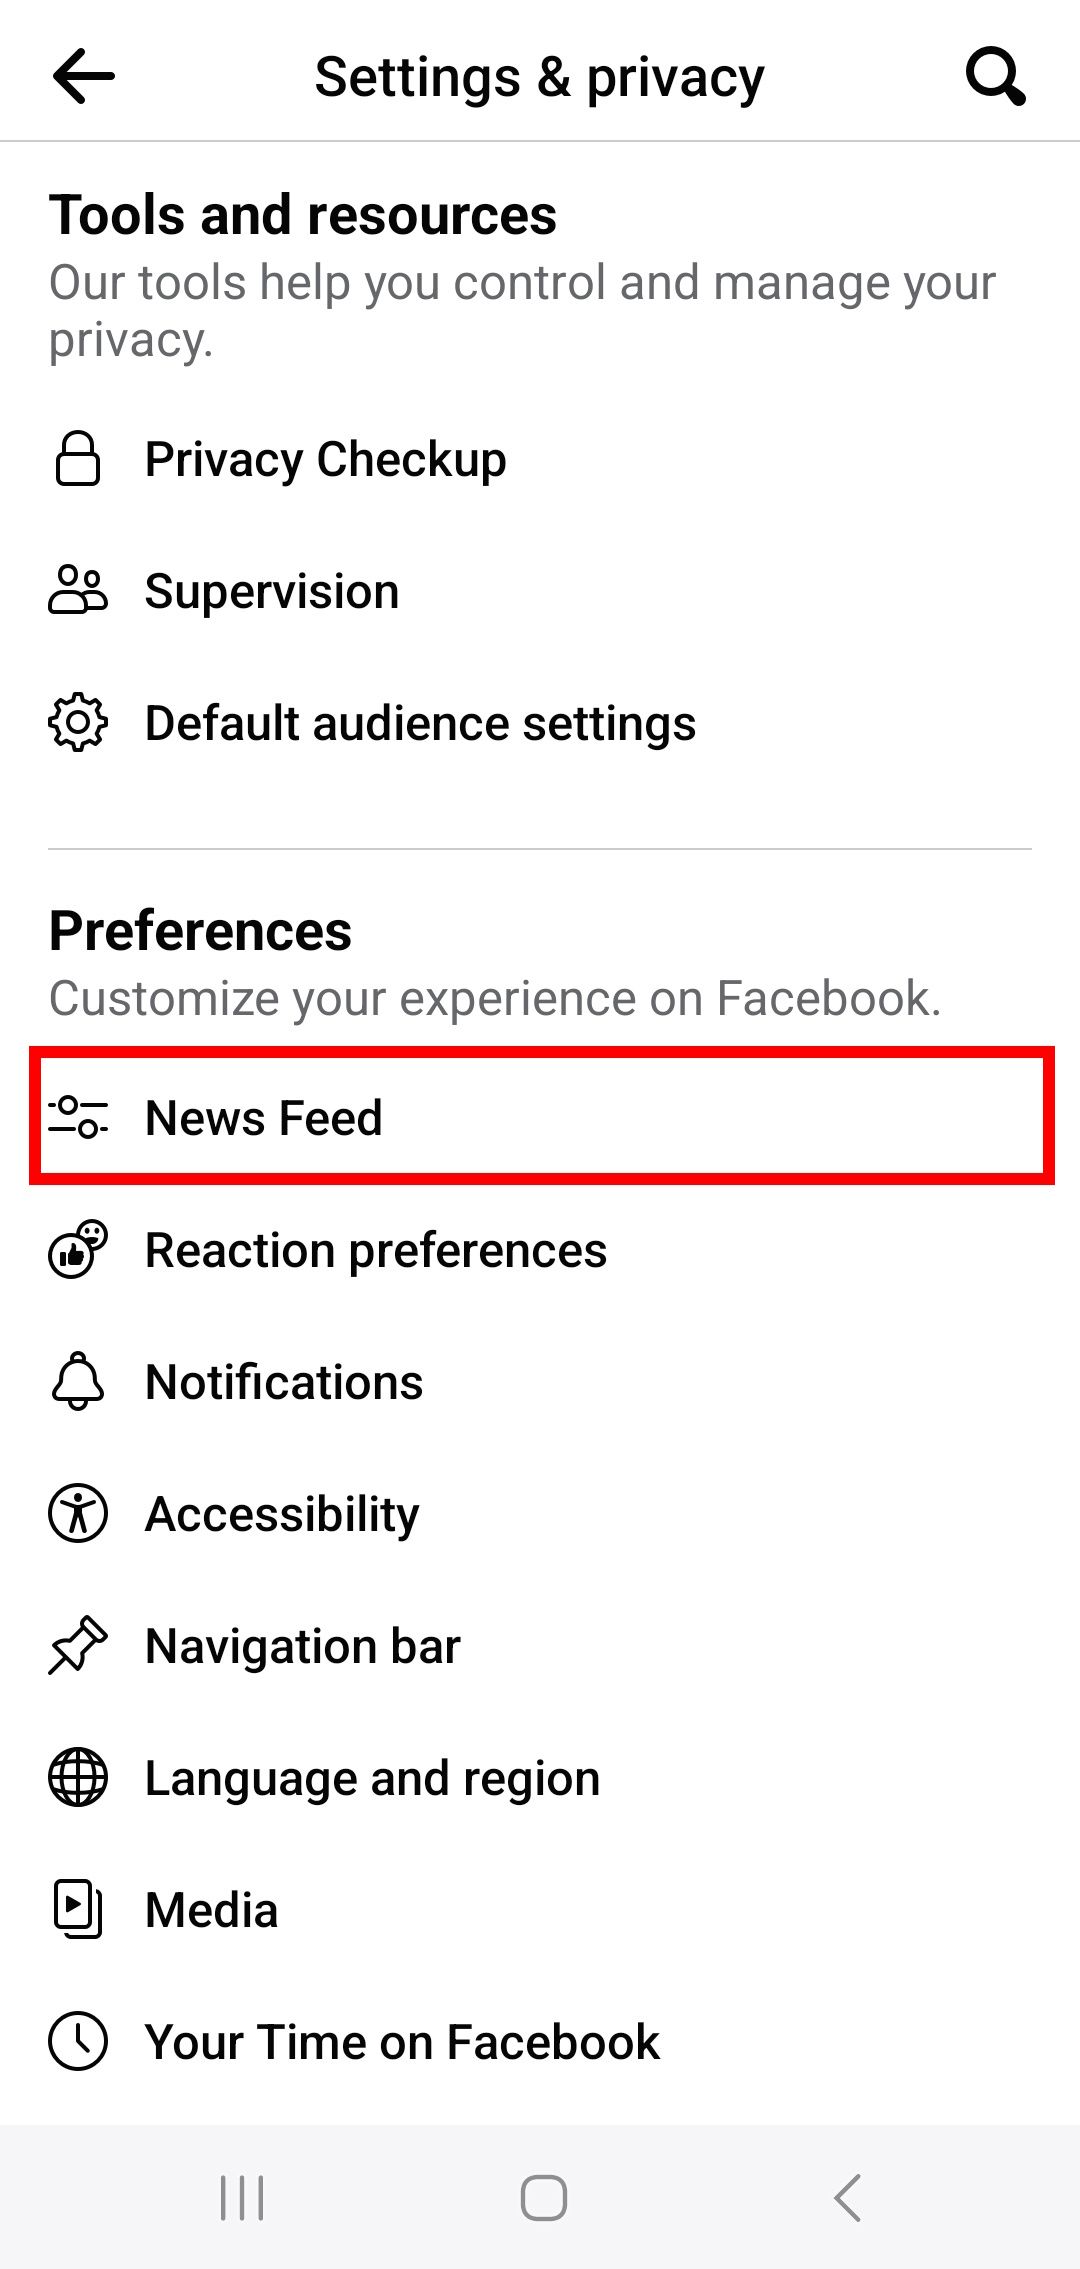 red rectangle outline highlighting news feed option under preferences